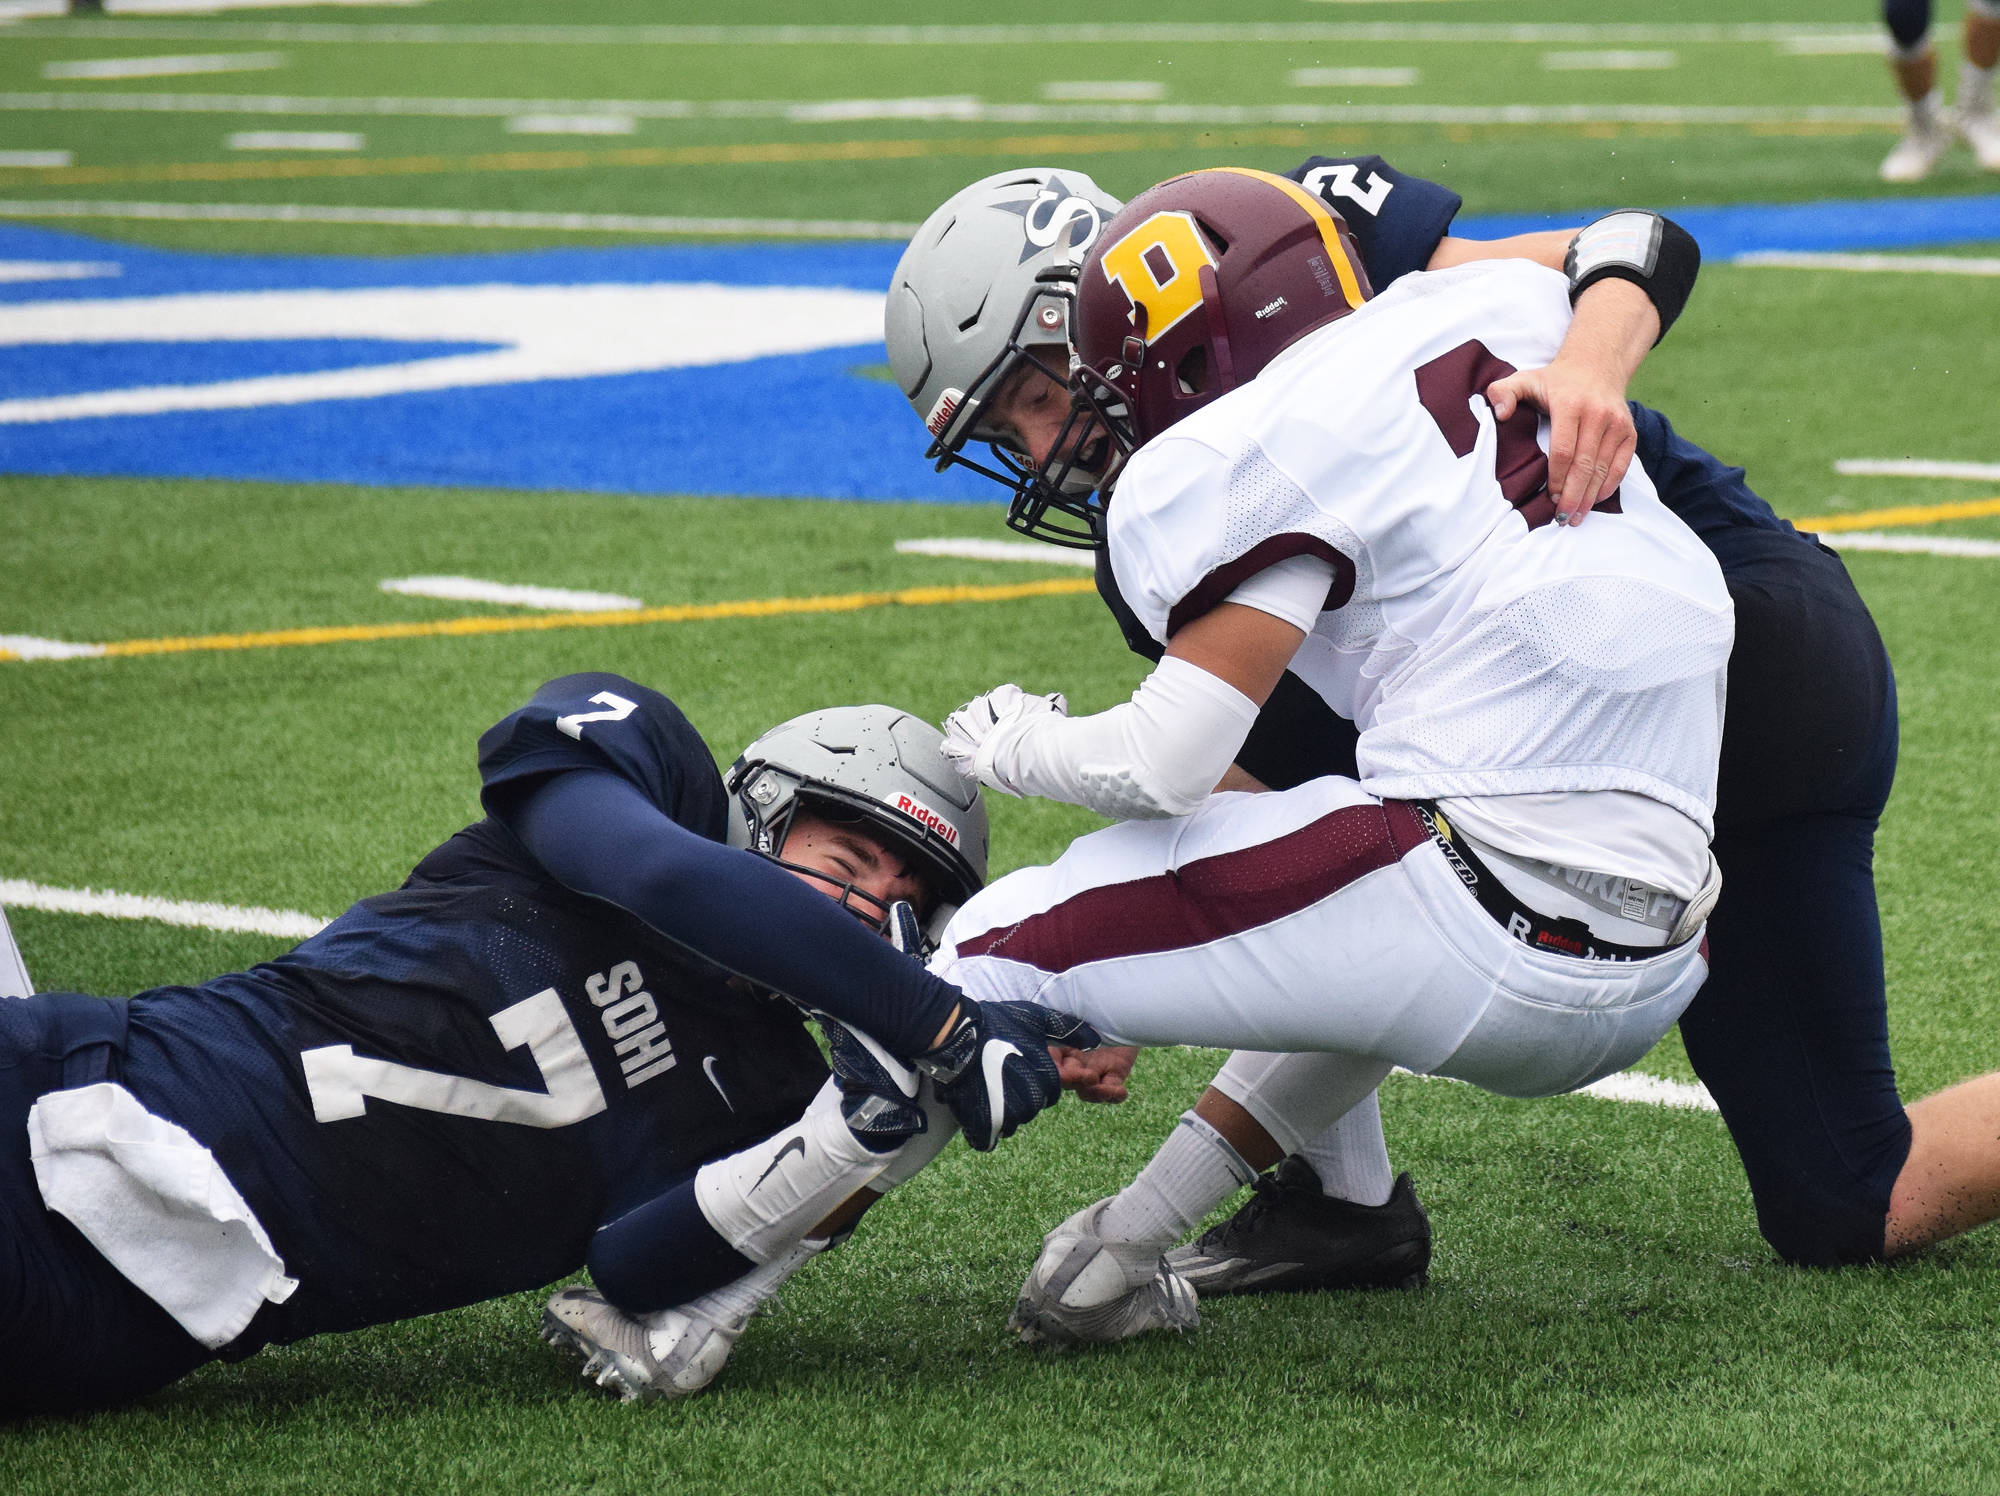 Soldotna linebackers Brandon Crowder (7) and Cody Quelland tackle Dimond running back Jaili Rescober Friday night at Justin Maile Field in Soldotna. (Photo by Joey Klecka/Peninsula Clarion)